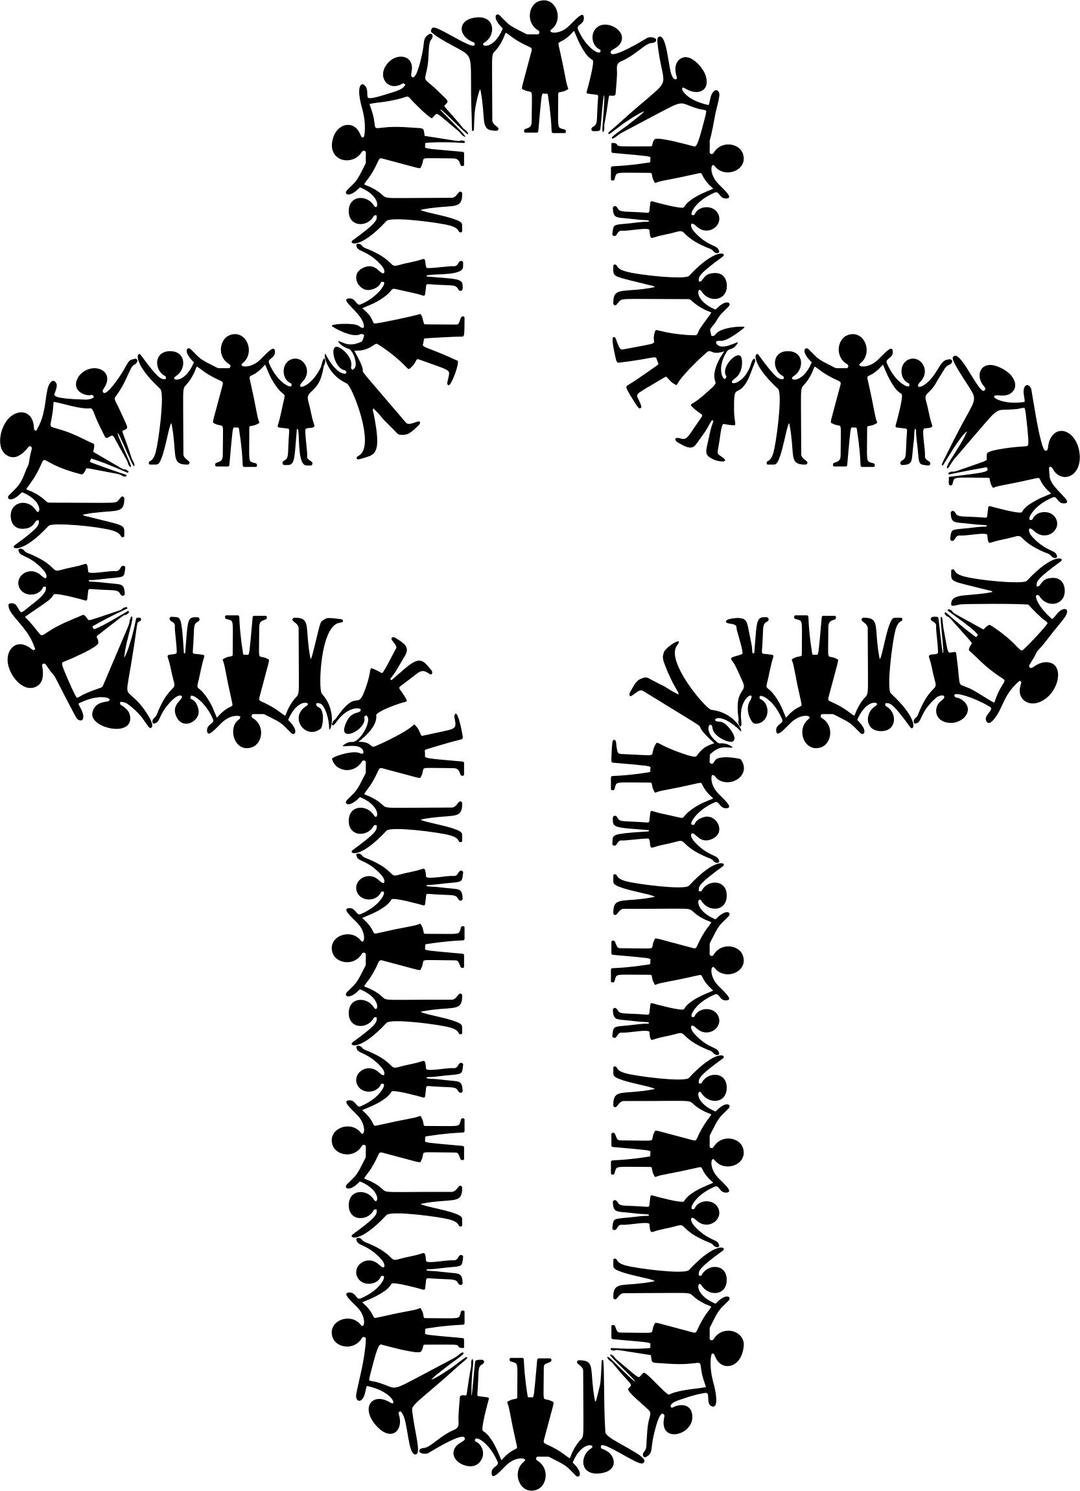 Three Children Holding Up Arms Cross png transparent